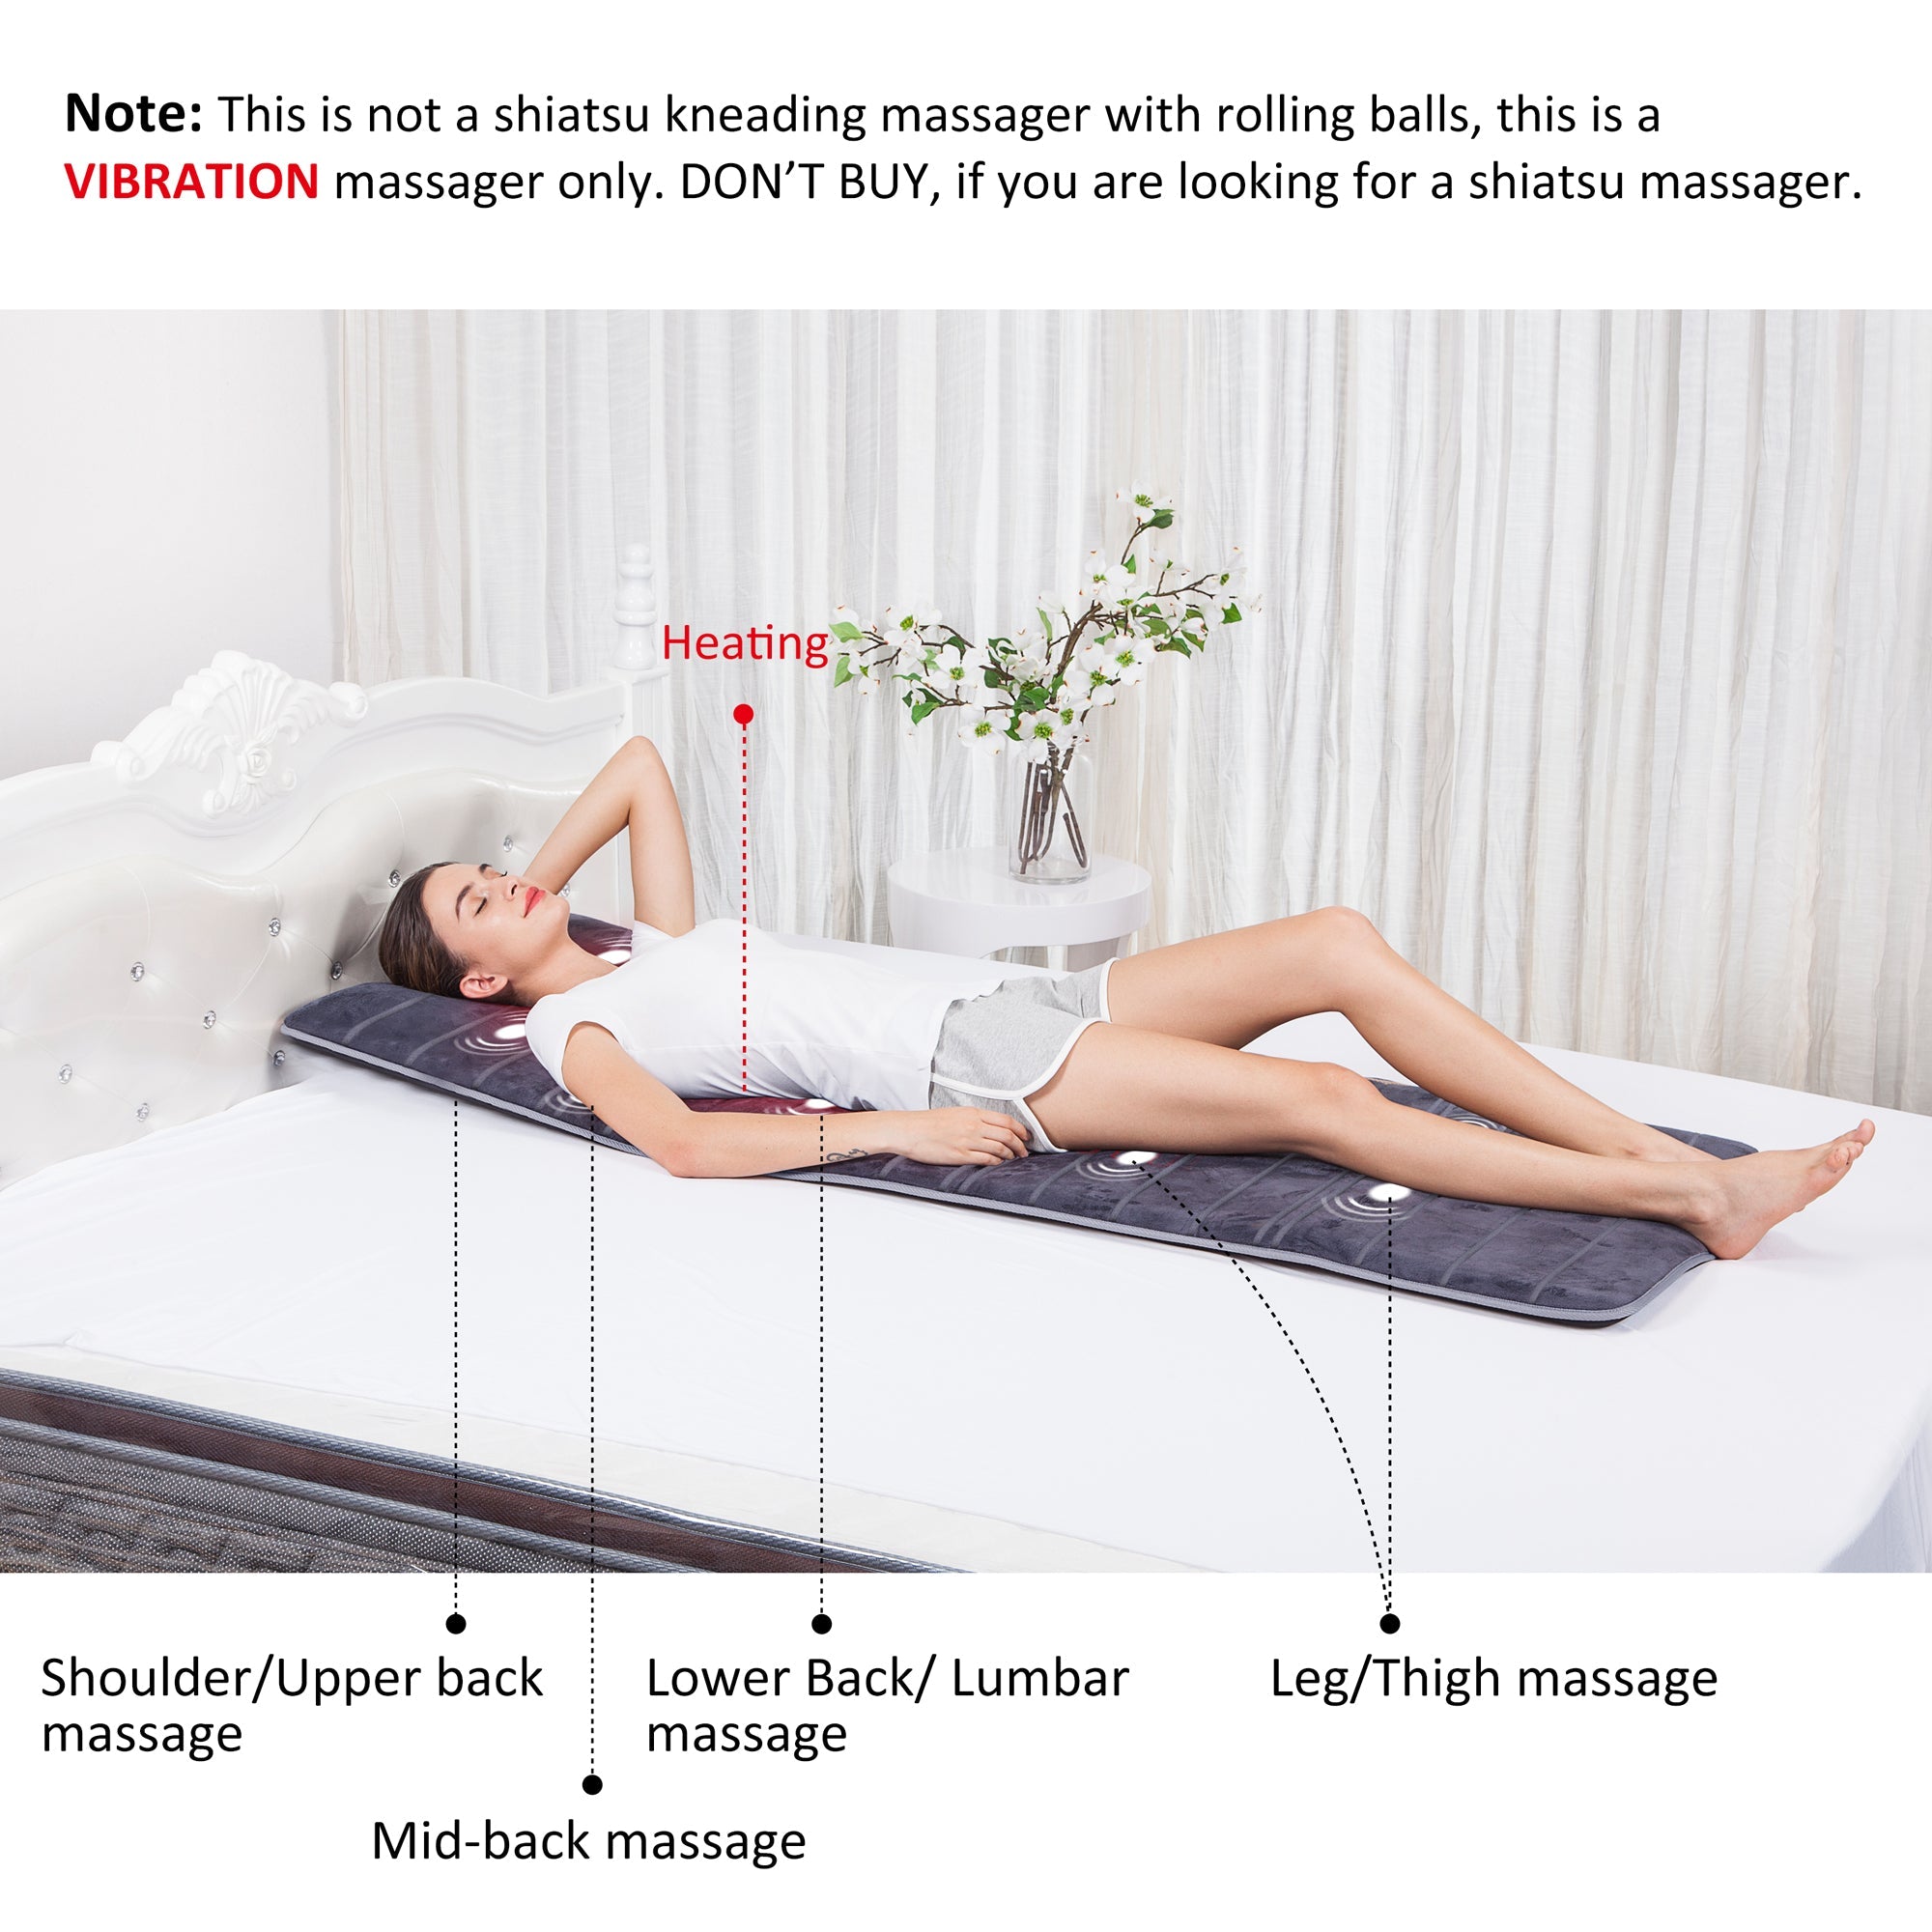 Copy of Comfier Full Body Massage Mat with Heat & Vibration Motors & 2 Therapy Heating pad - 3603S